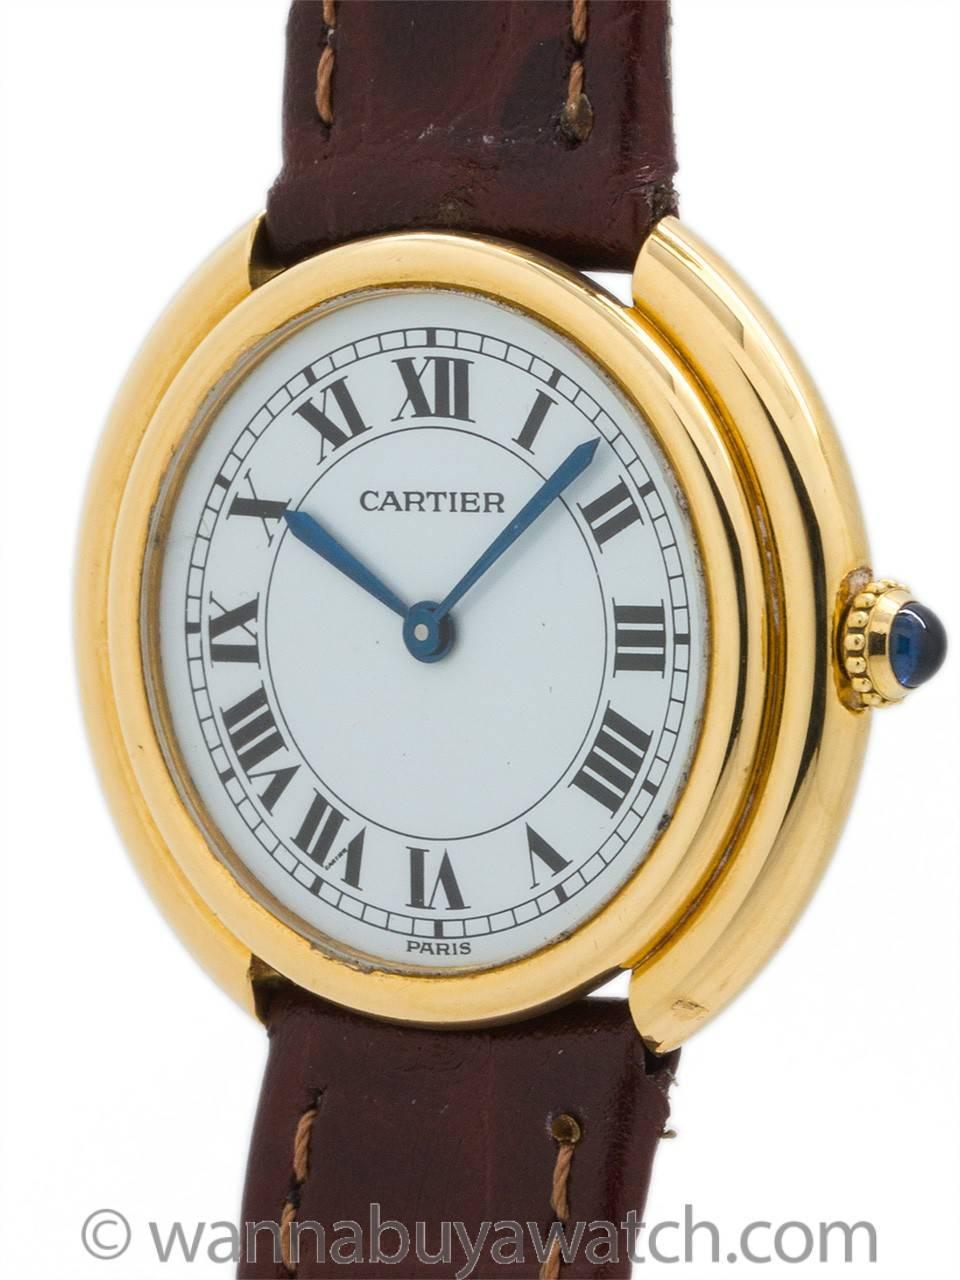 Cartier Tank 18K Gold “Vendome” circa 1980’s. Man’s 33 x 32mm round case with rounded stepped case design. Featuring white gloss dial with classic Cartier Roman figures, blued steel hands, and powered by 17 jewel manual wind movement with cabochon